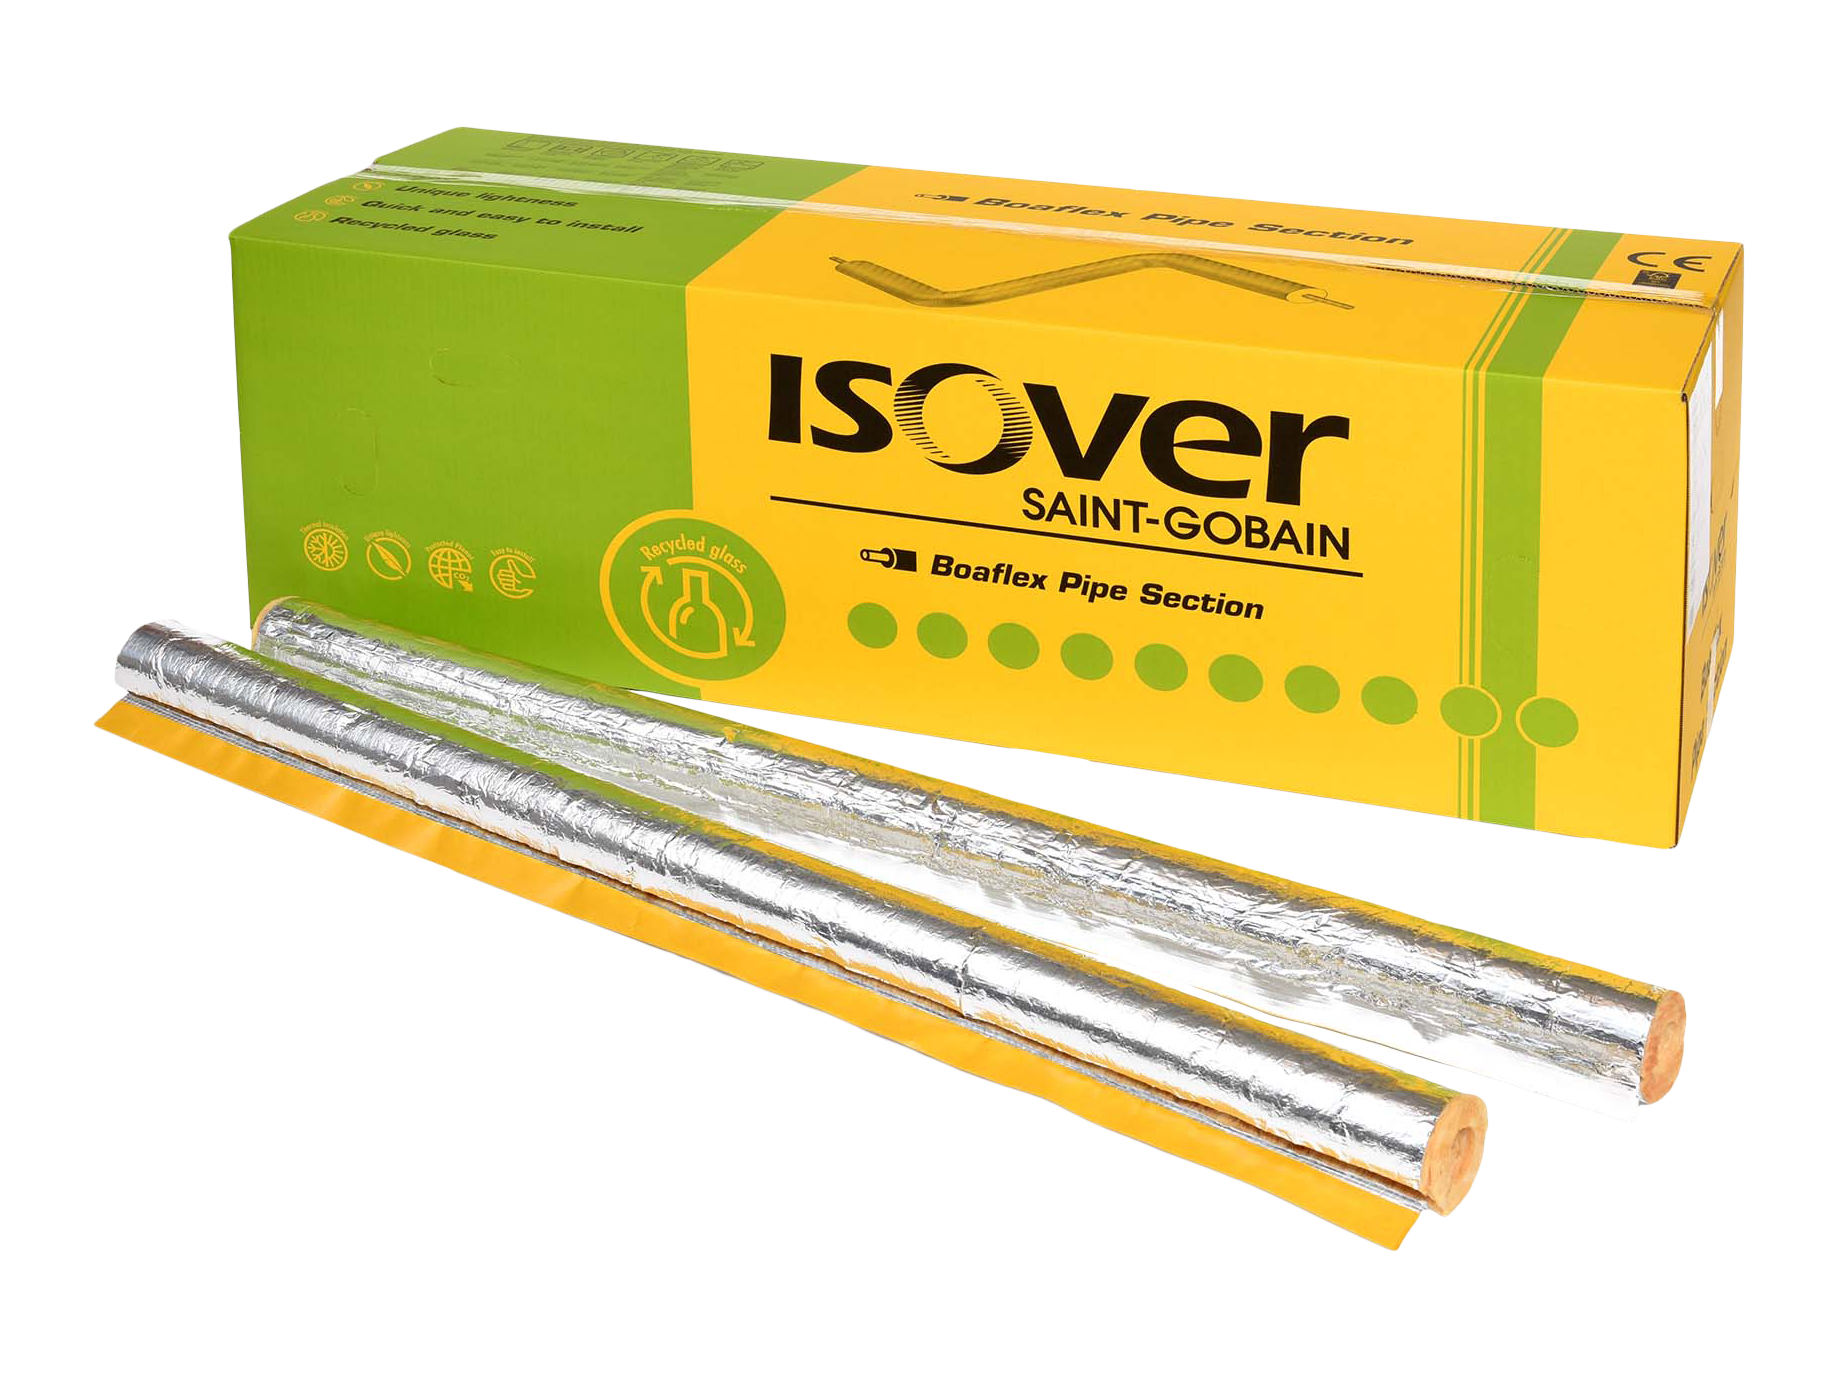 ISOVER Boaflex Pipe Section 60/50